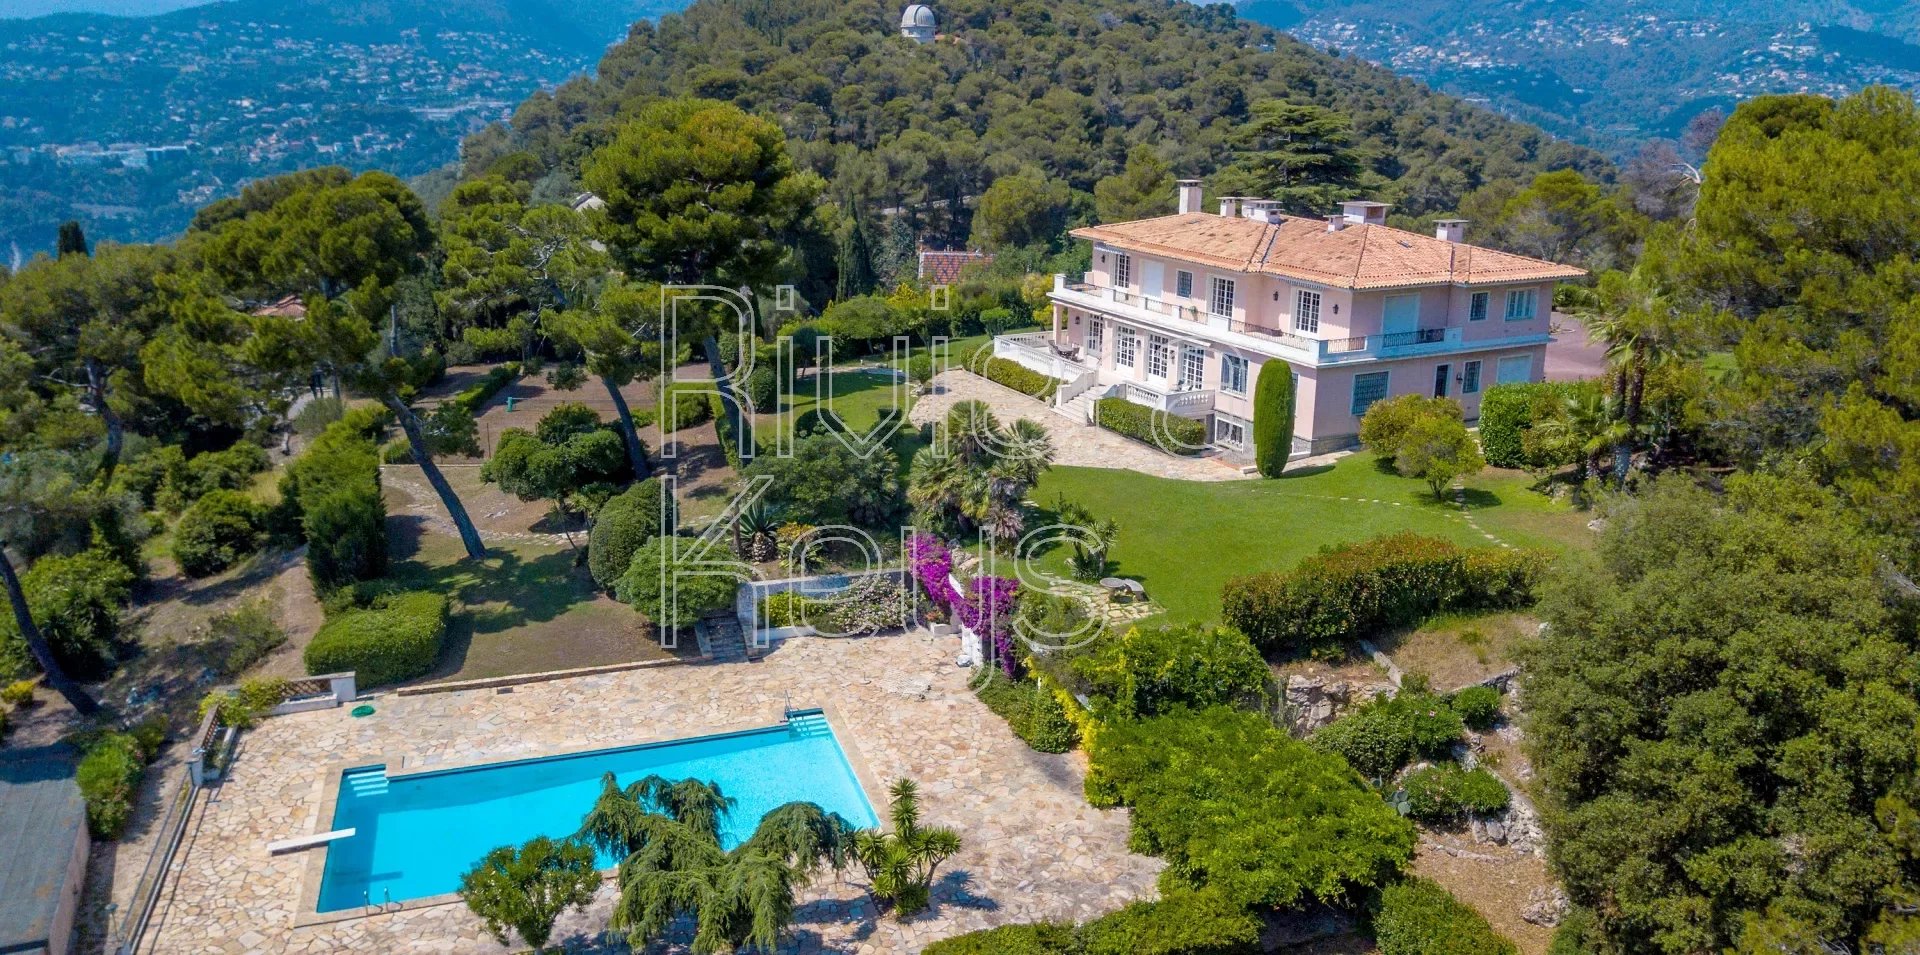 NICE: Exceptional property with panoramic view, absolute privacy